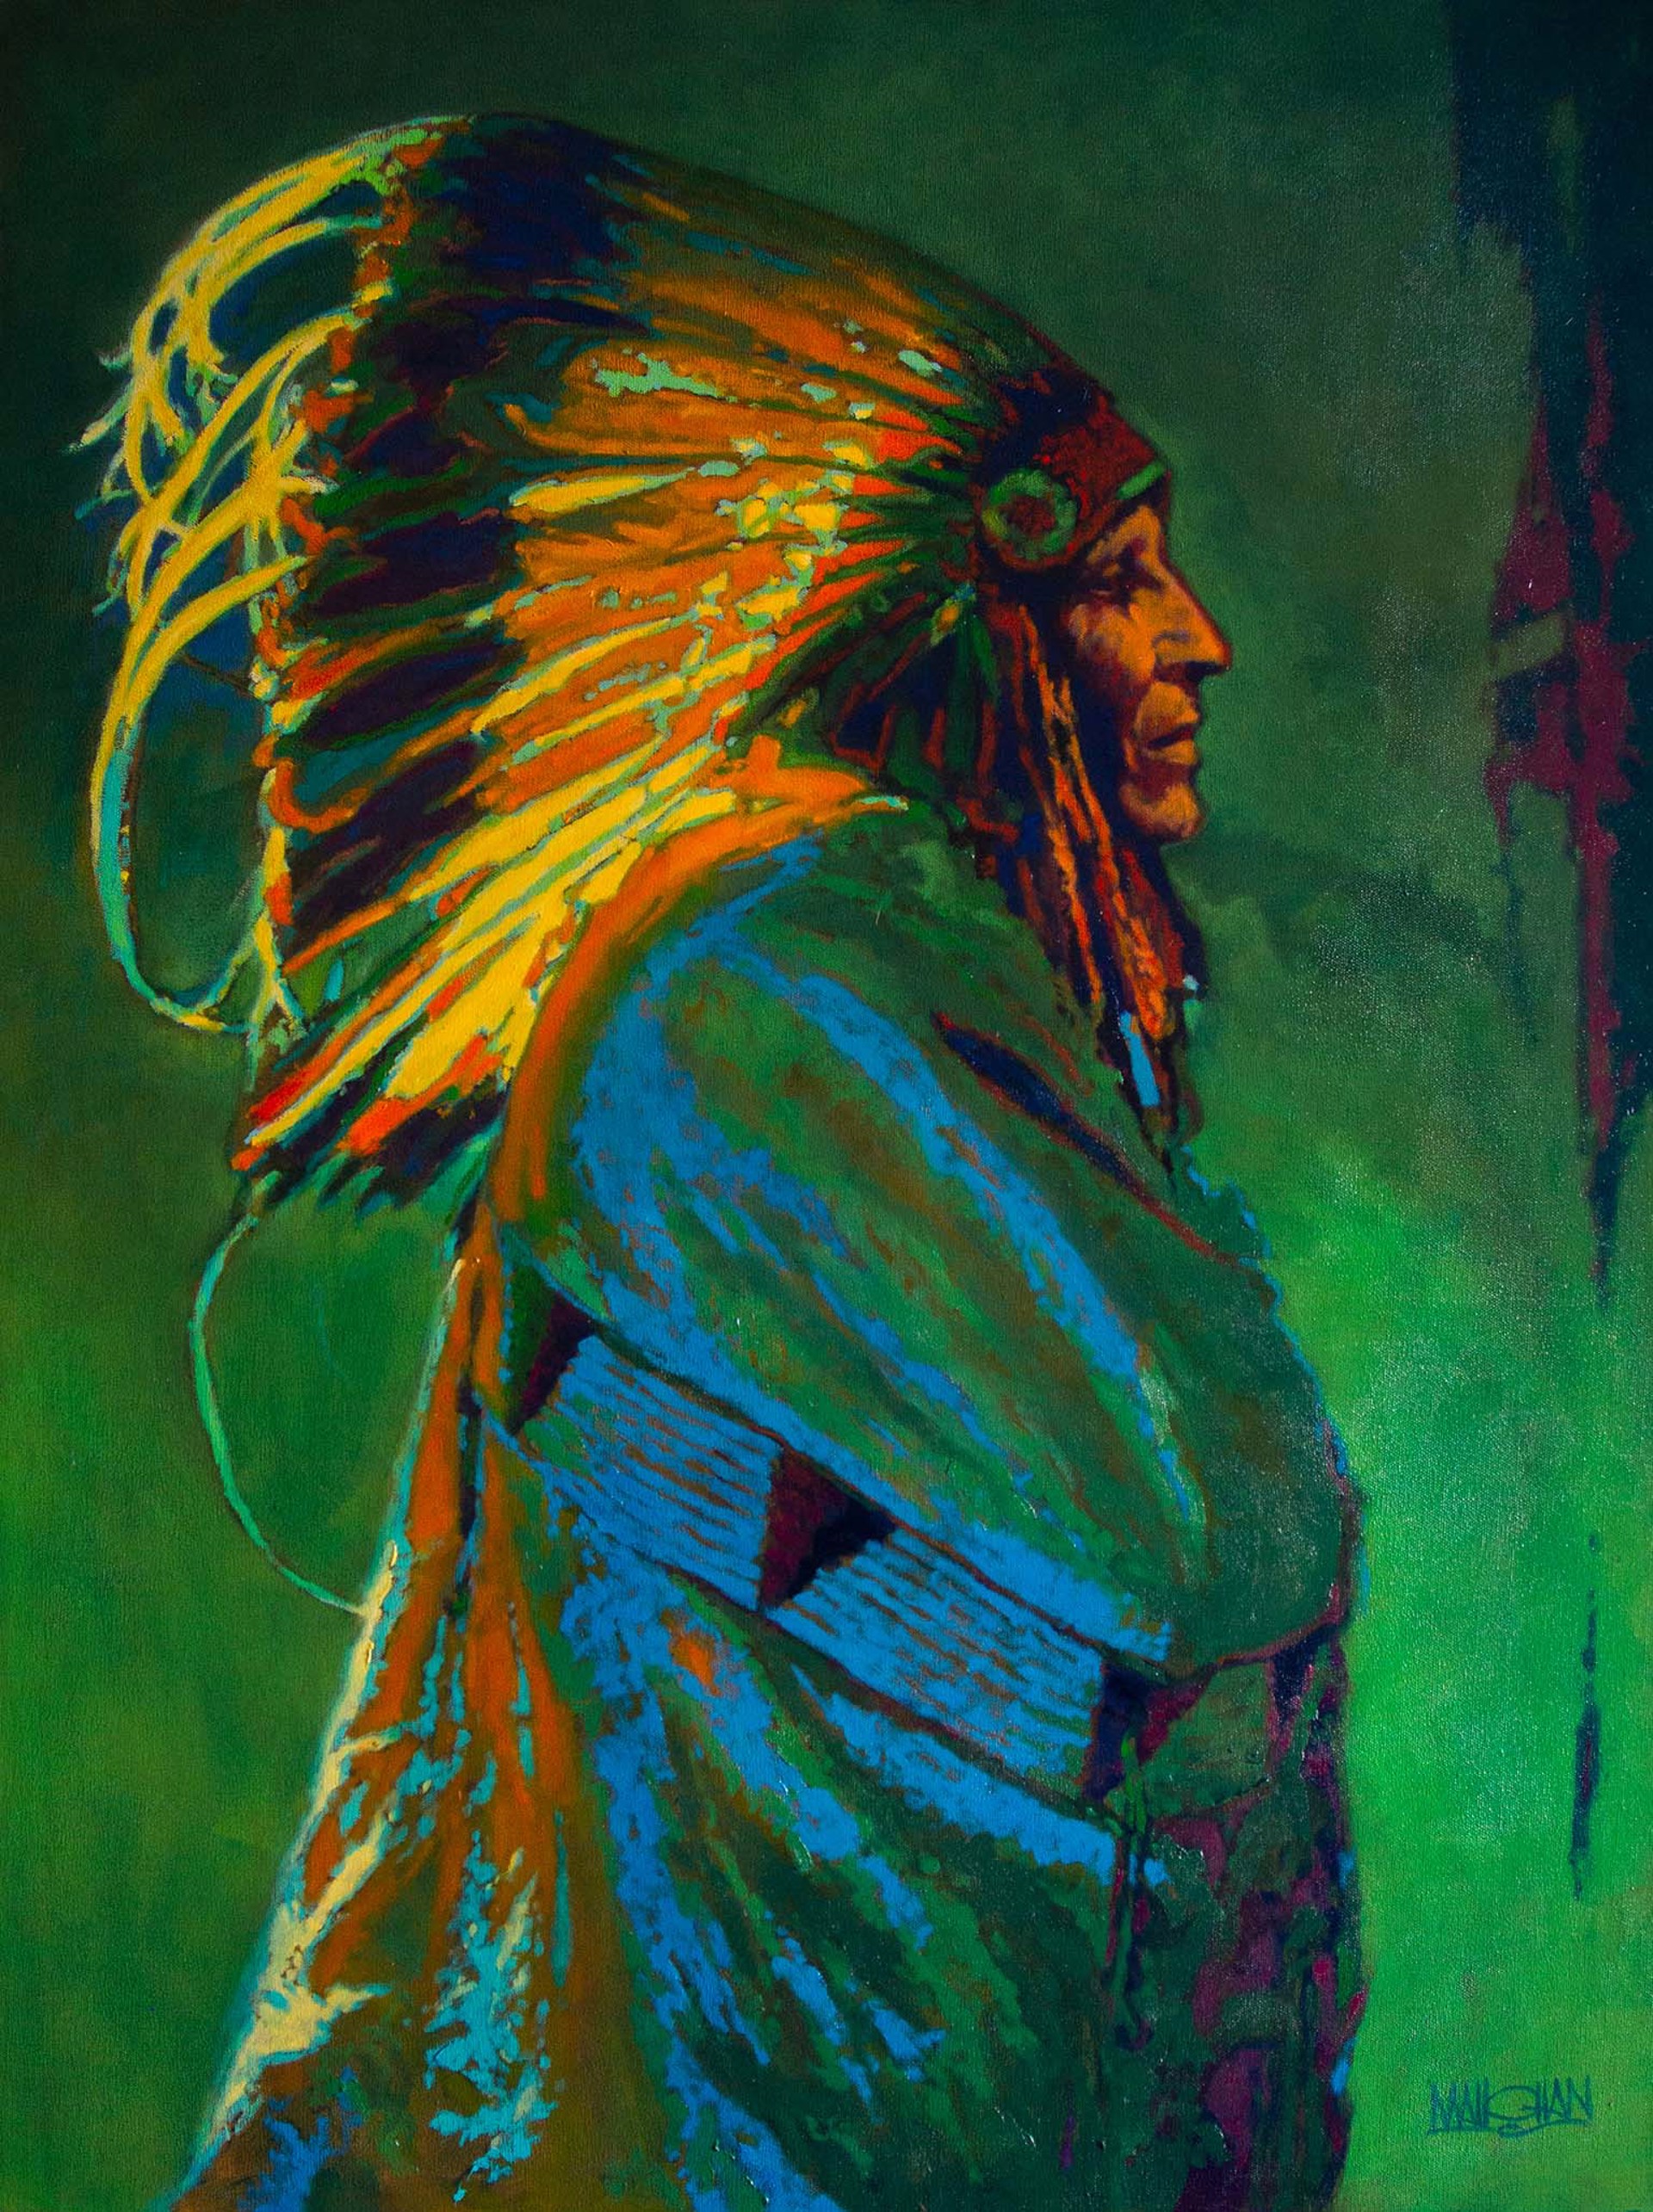 War Bonnet by William Maughan